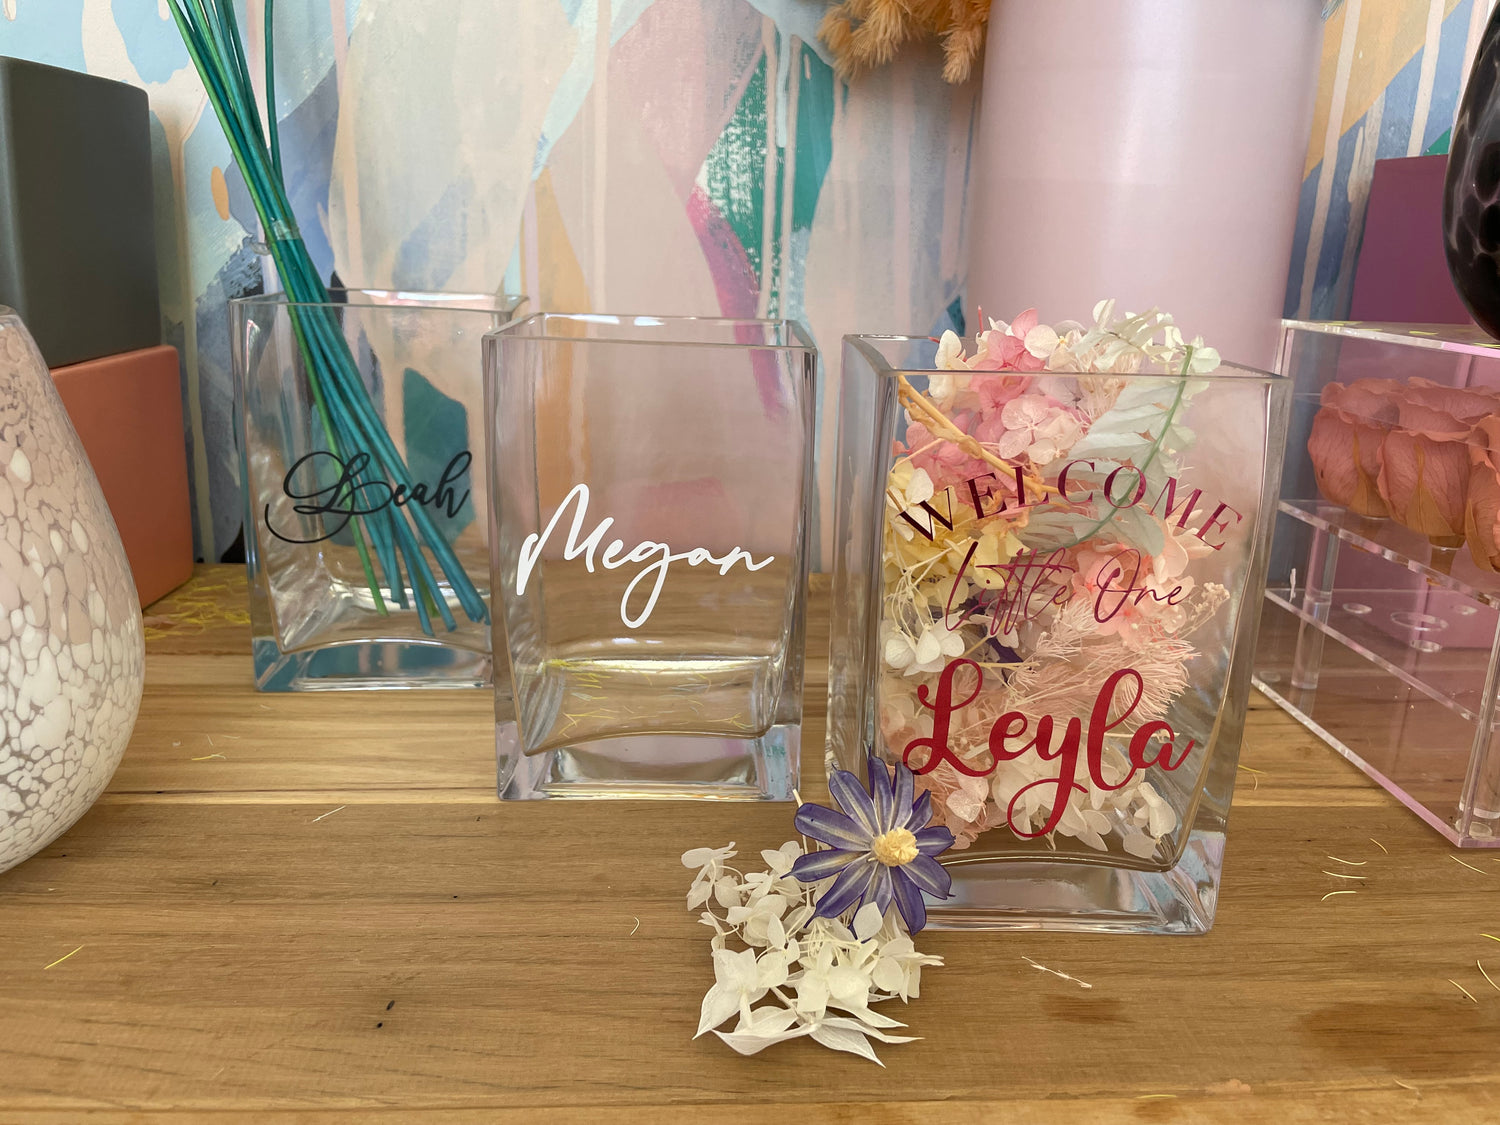 https://xox-with-love.myshopify.com/products/clear-glass-vase-personalised?_pos=1&_sid=45649b998&_ss=r